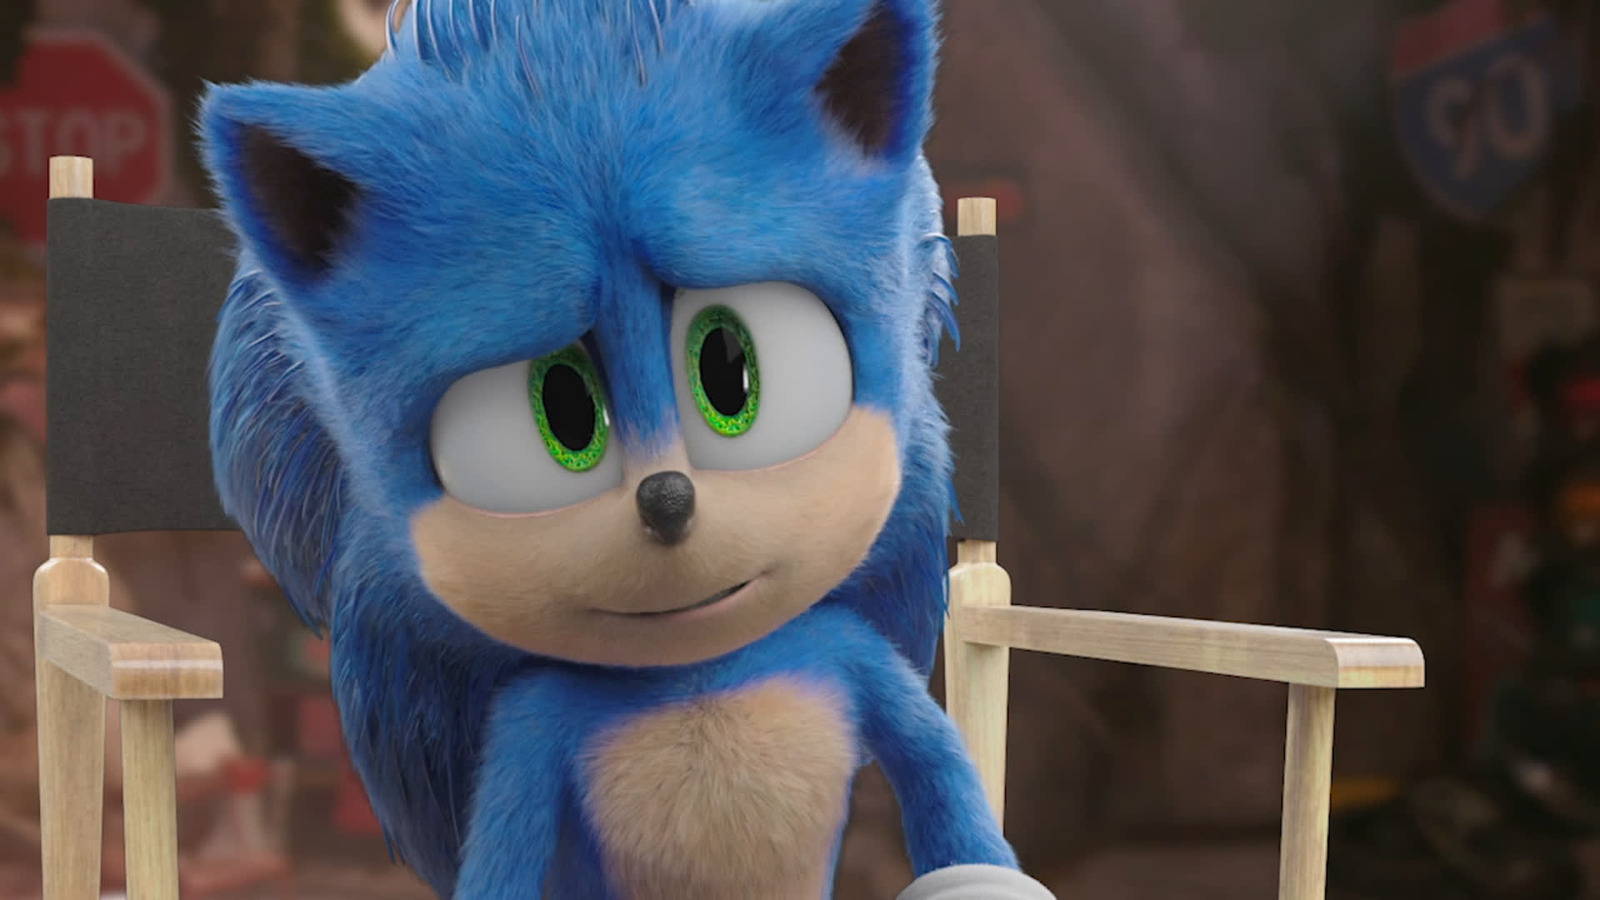 Does Sonic the Hedgehog 2 have a post-credits scene? Director